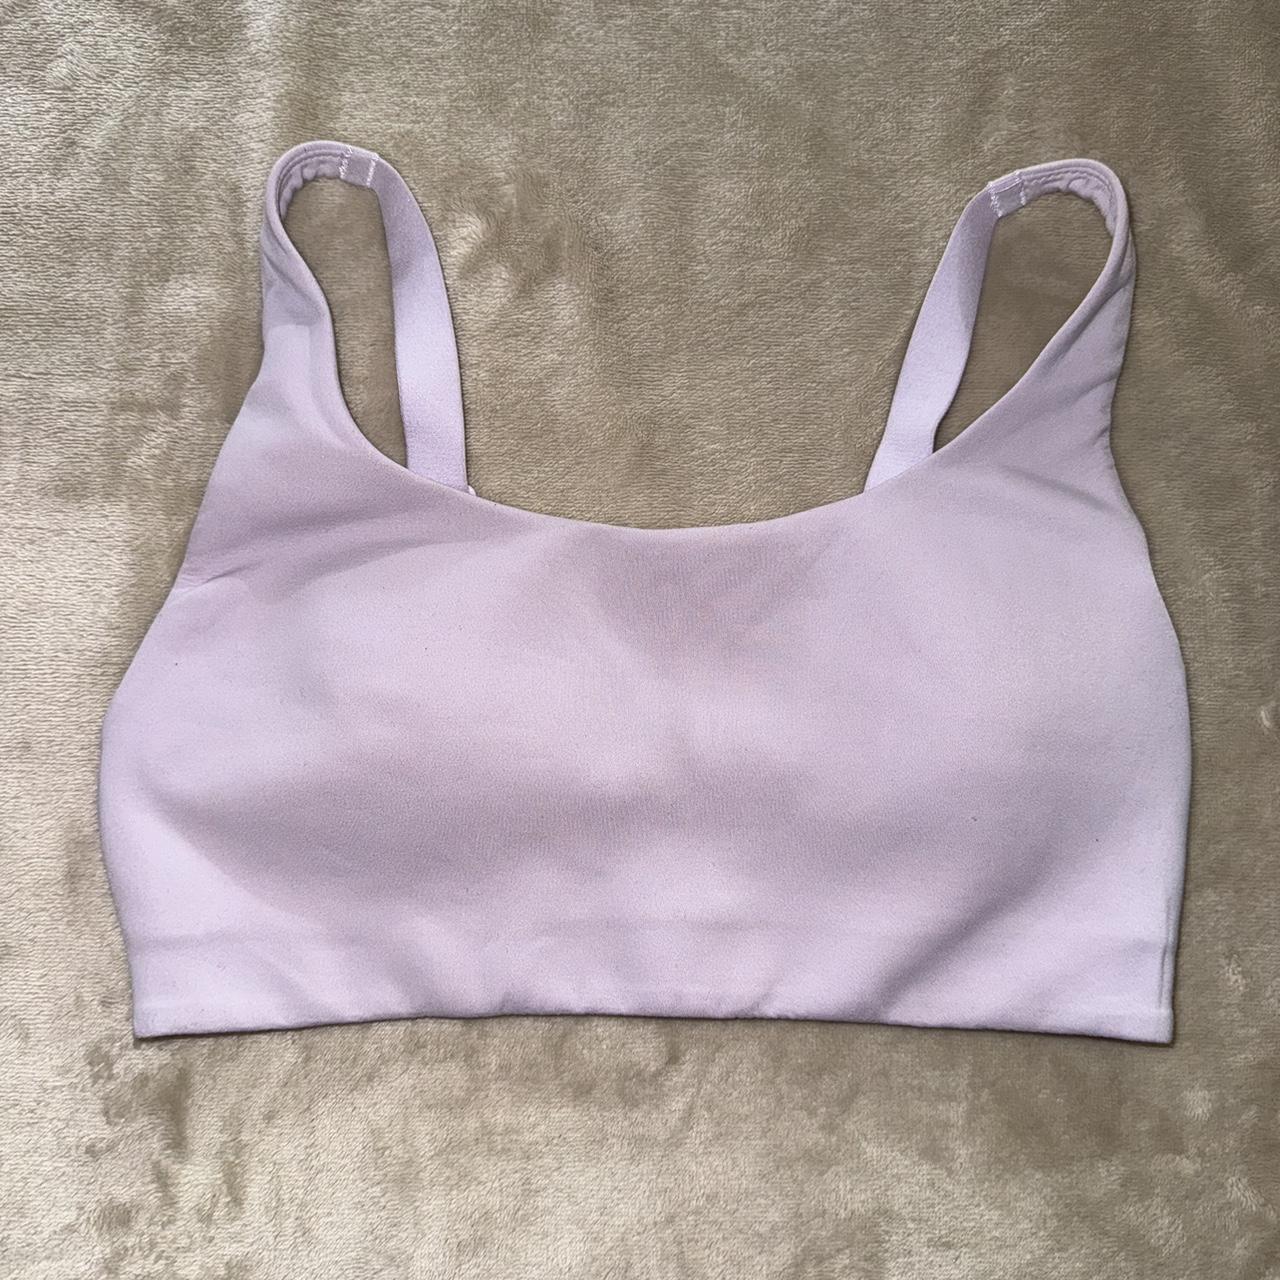 Lonsdale Women's Sports Bra💒 £7 for one or £12 for - Depop